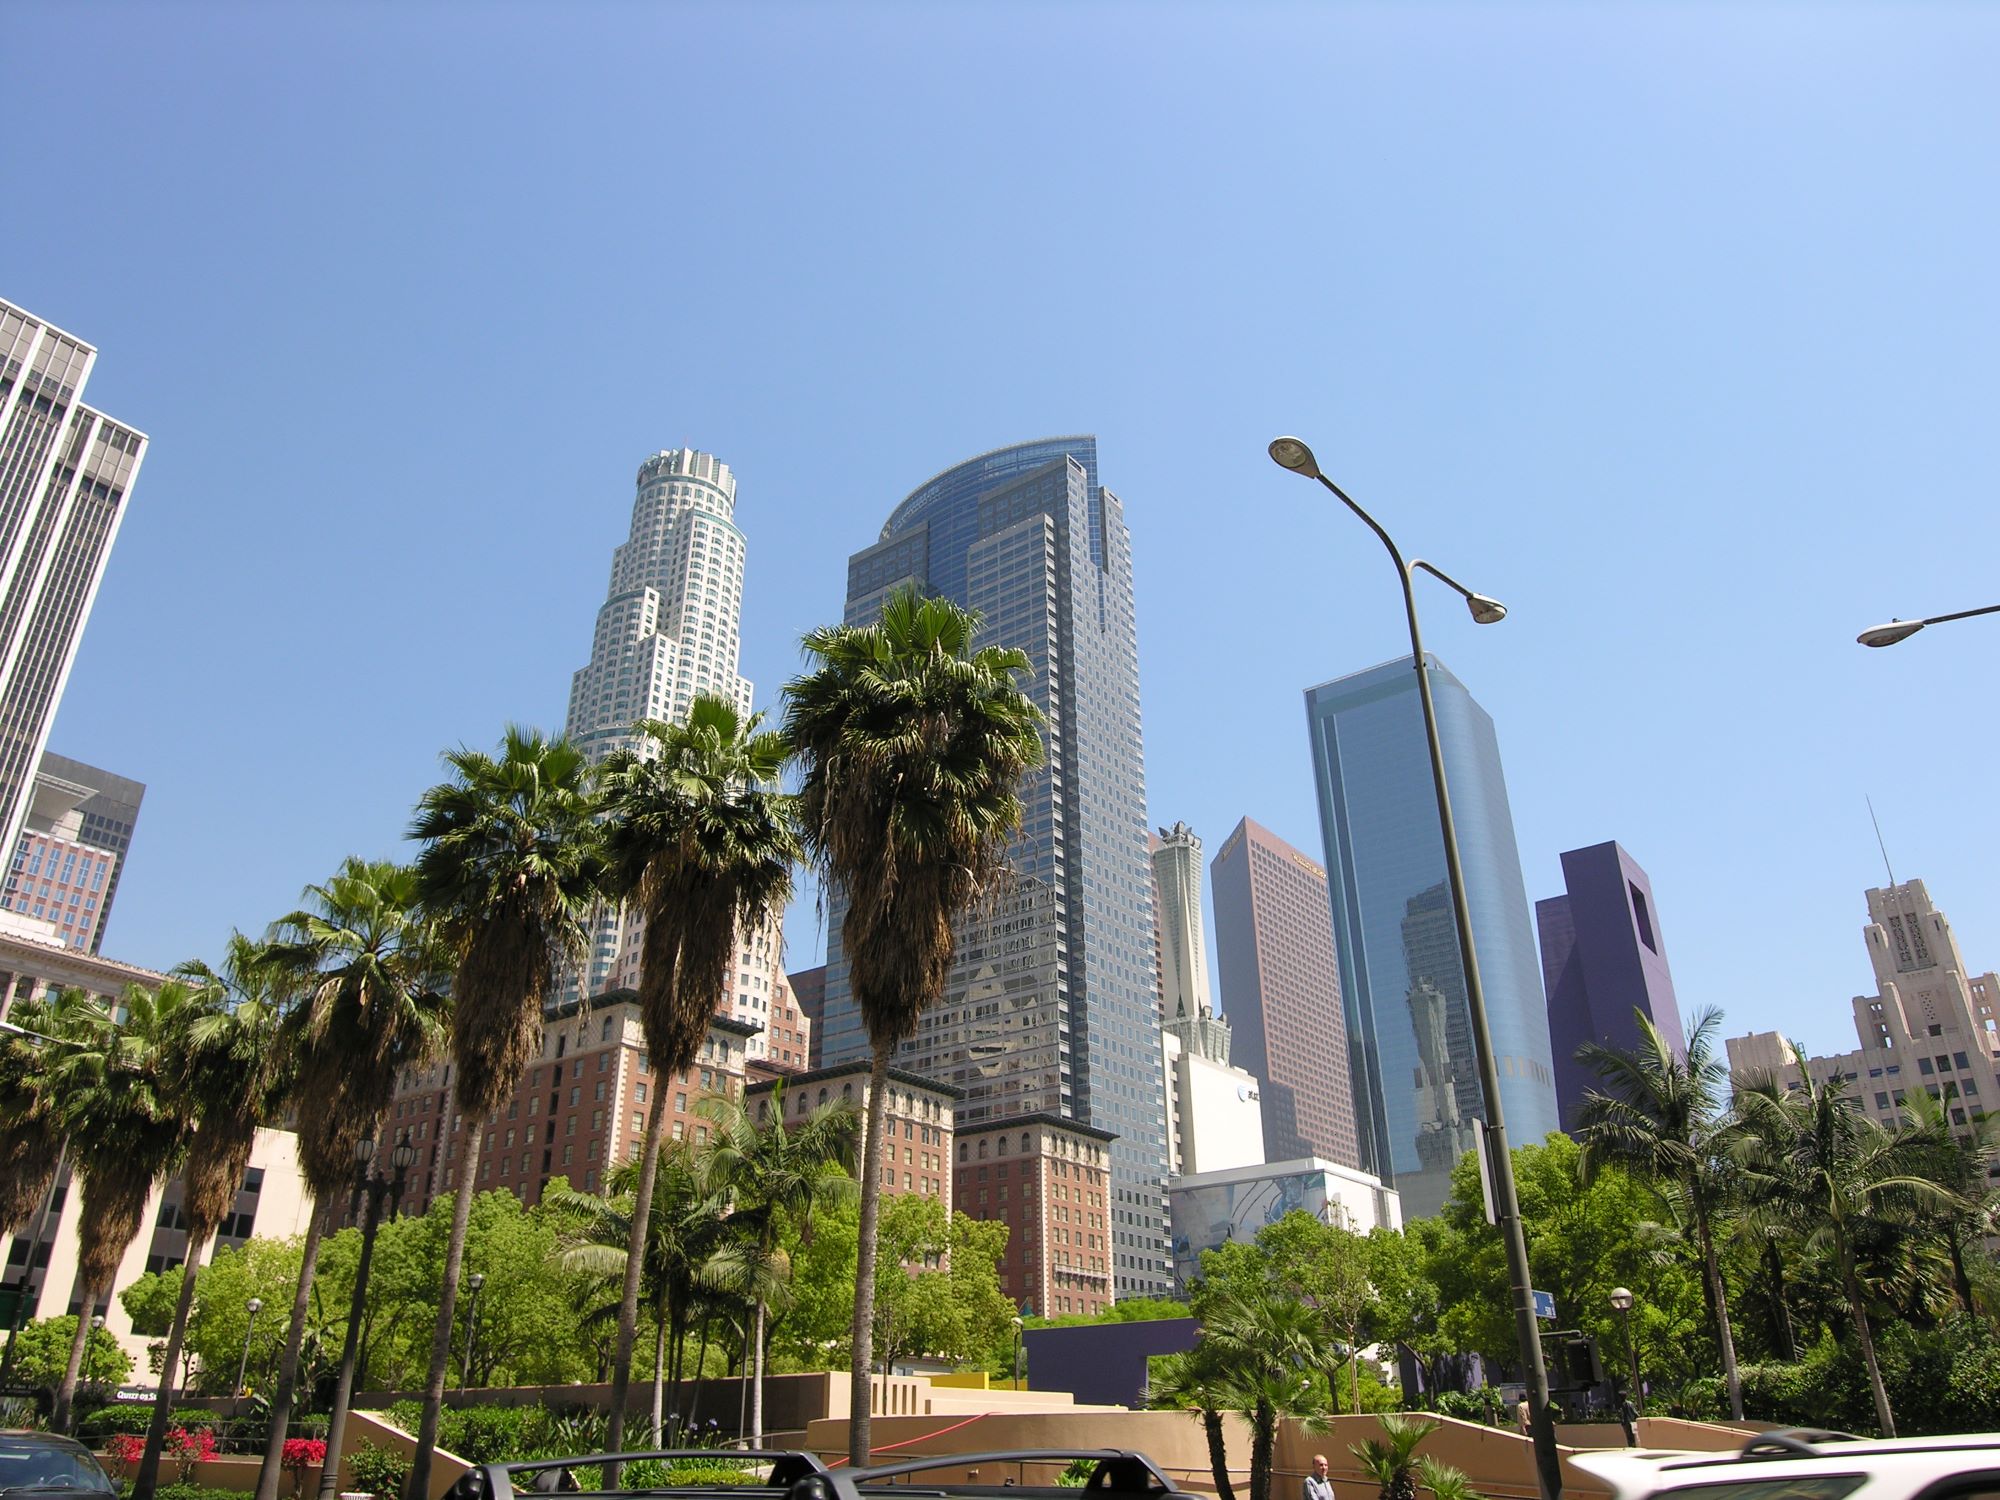 View of Downtown Los Angeles from Pershing Square